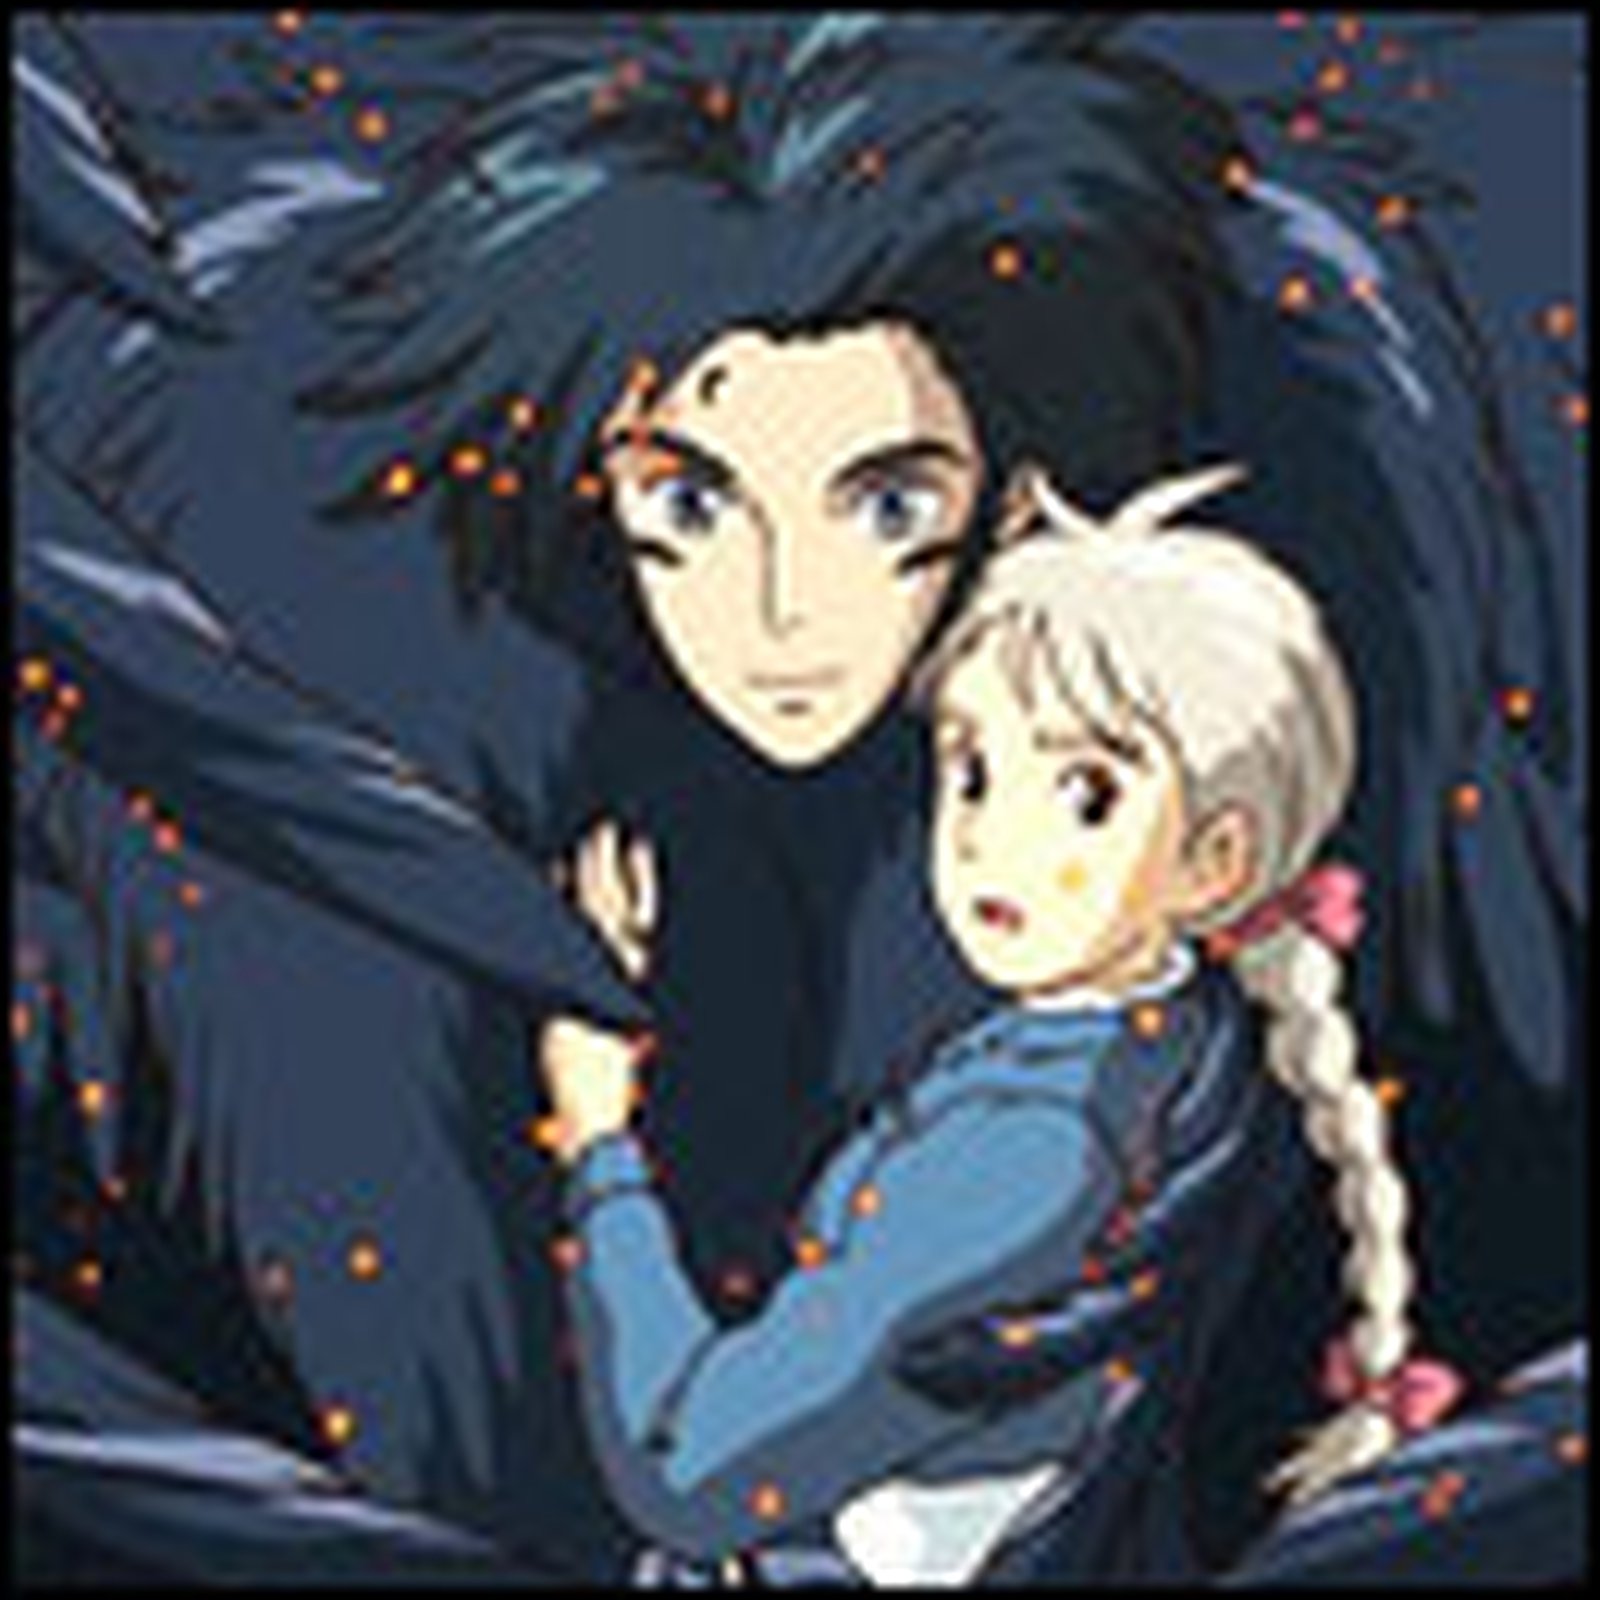 Howl's Moving Castle : Jean Simmons, Christian Bale, Blythe Danner, Billy  Crystal, Emily Mortimer, Hayao Miyazaki: Movies & TV 